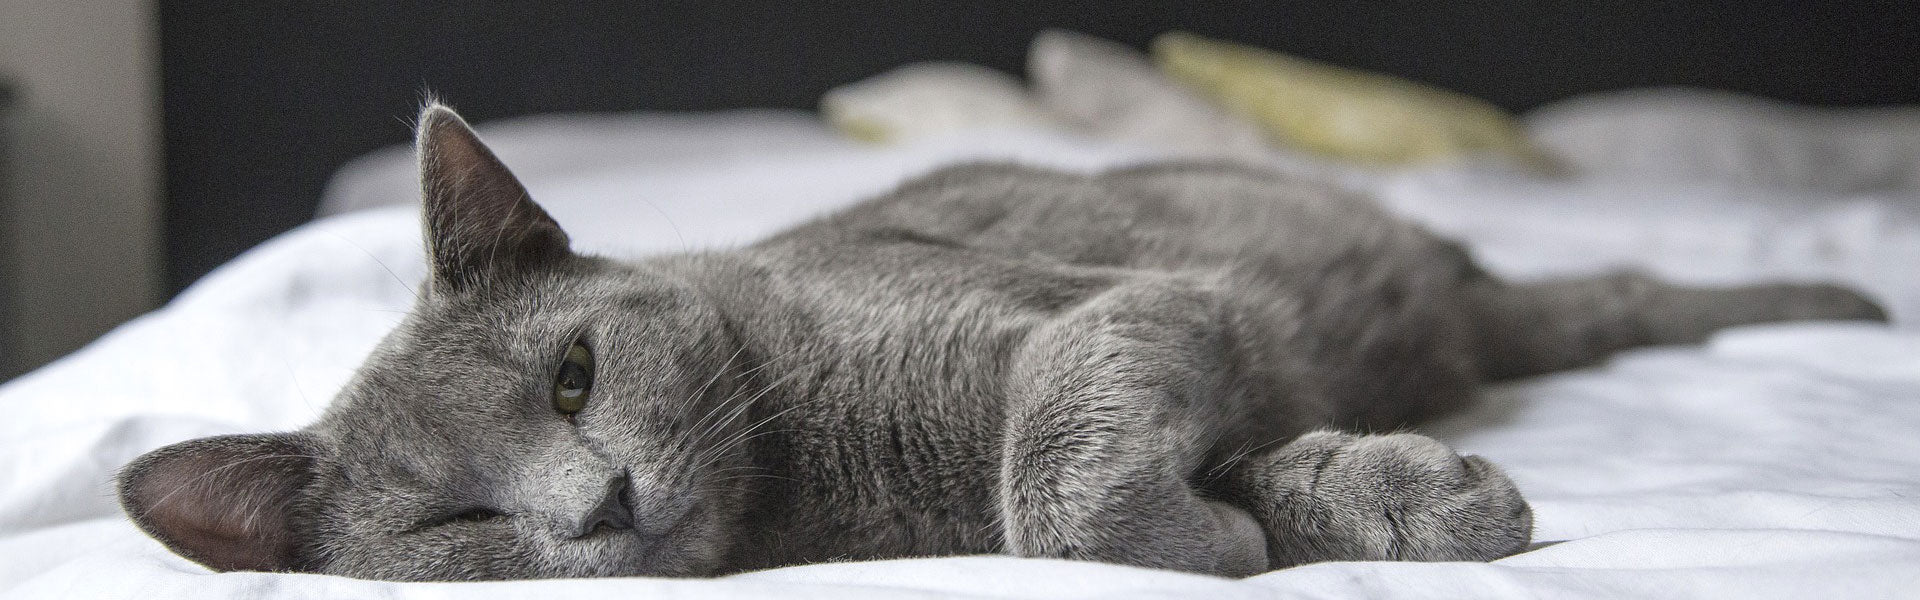 A sleepy grey cat lounging on a bed.